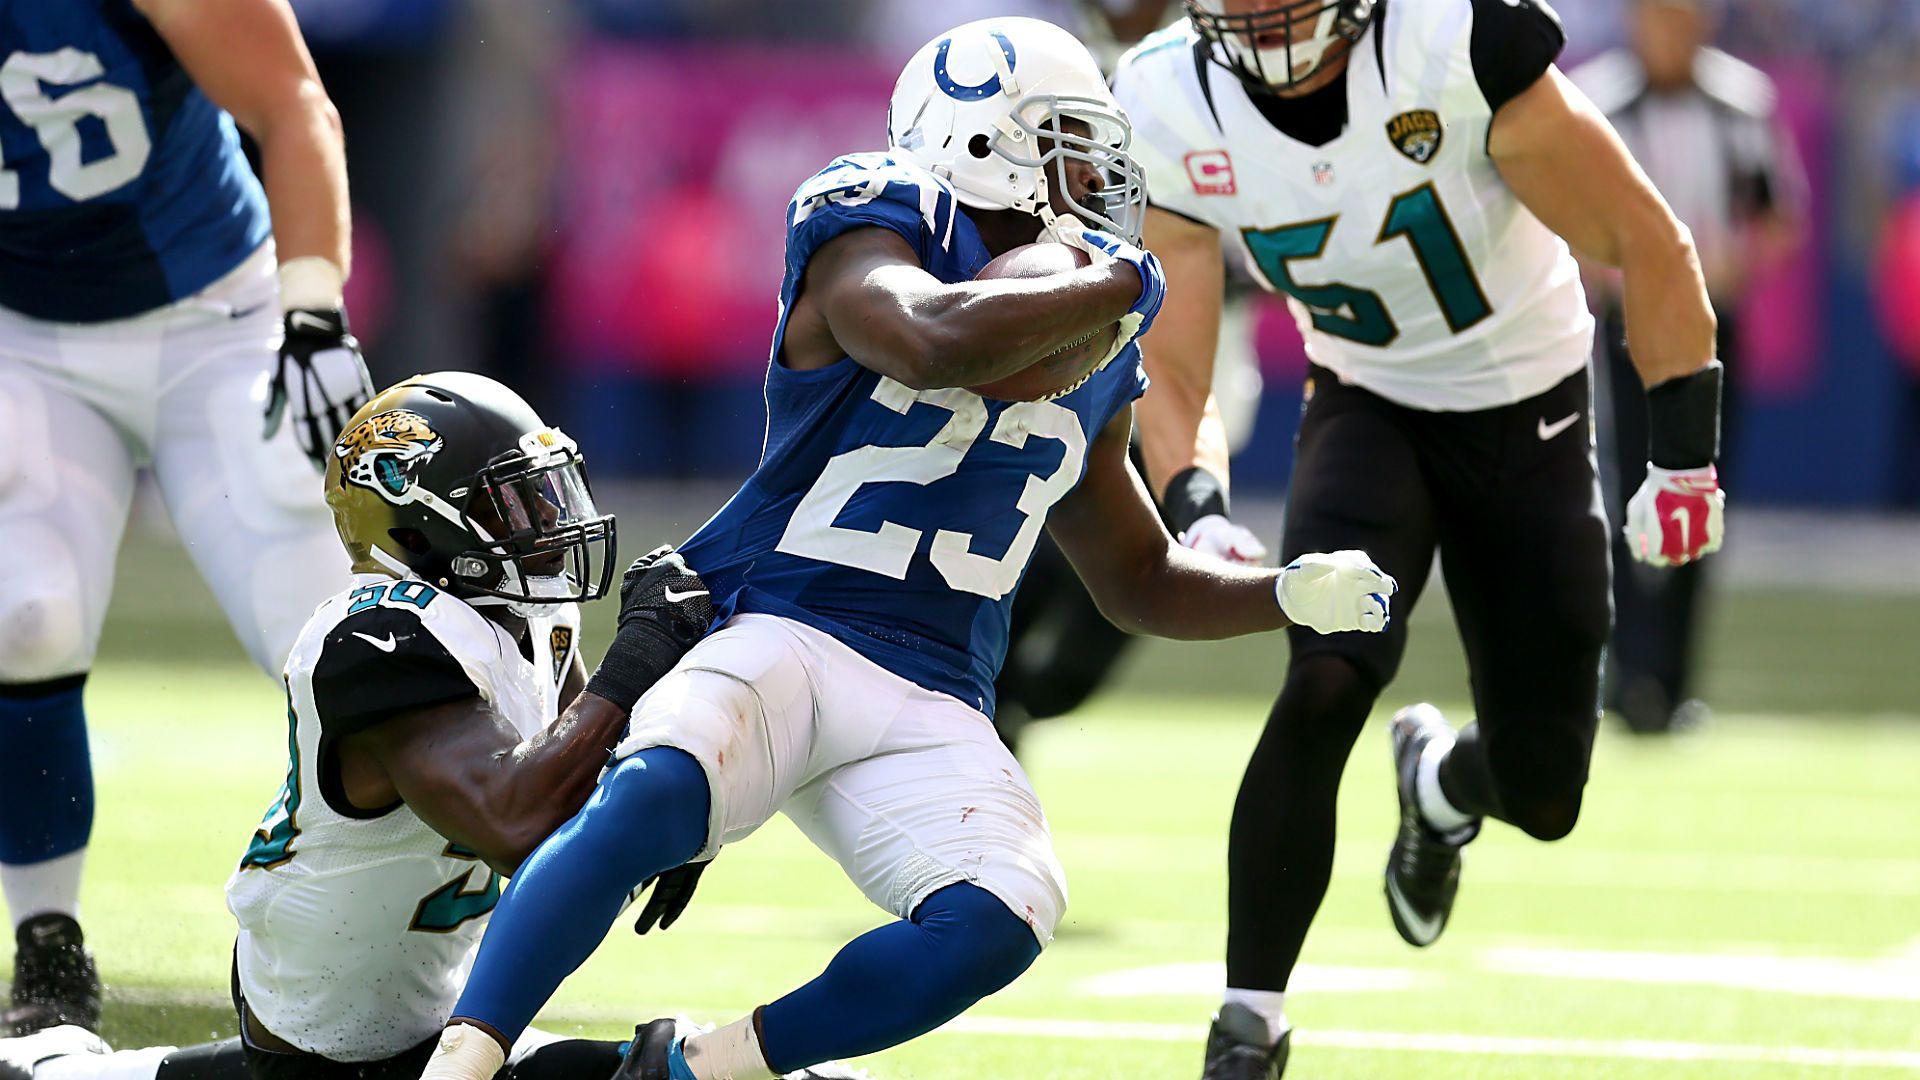 Frank Gore: 'I've got to play smarter'